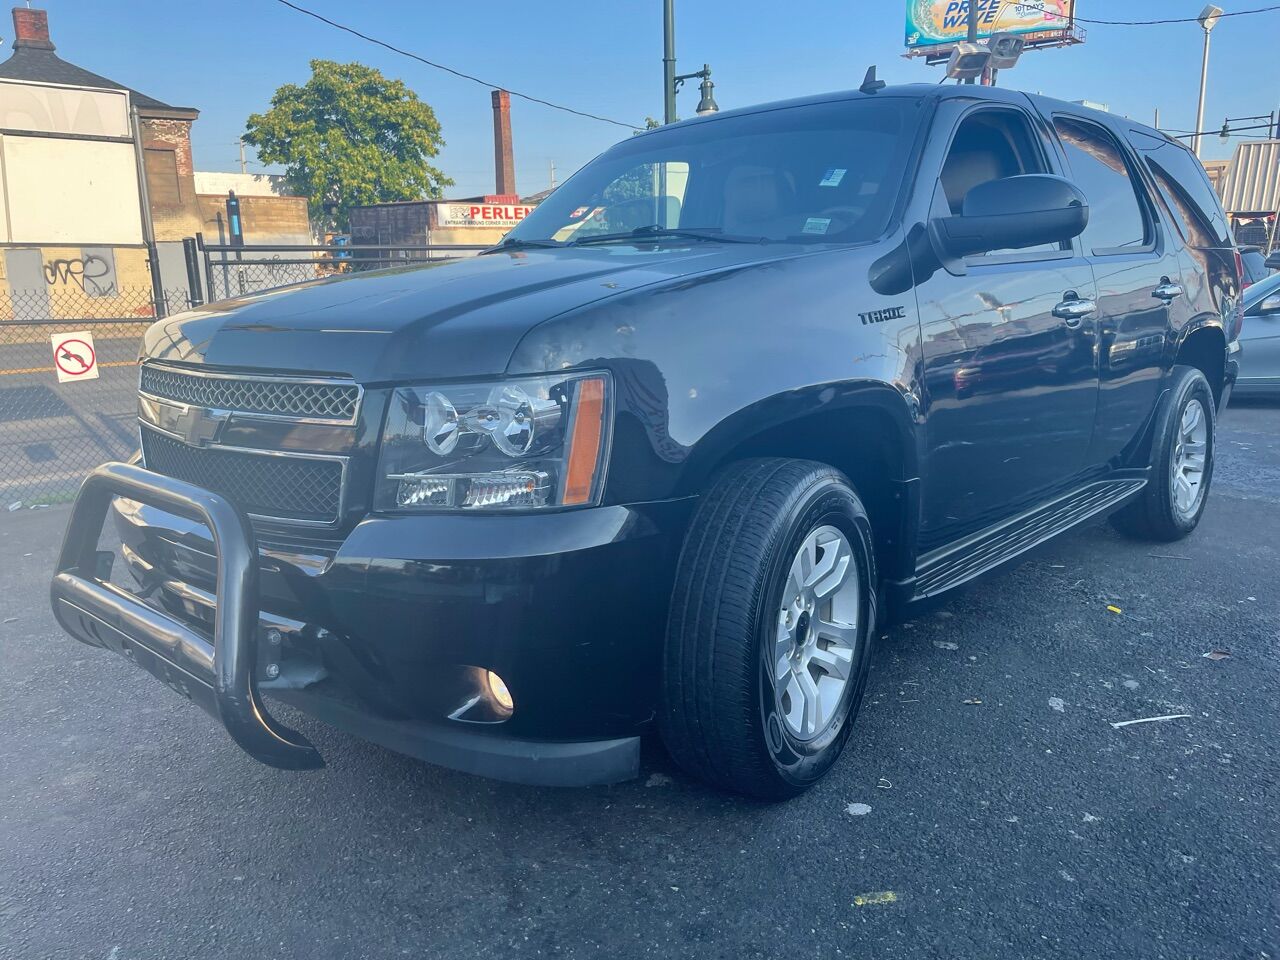 2009 Chevrolet Tahoe For Sale In New Jersey - Carsforsale.com®